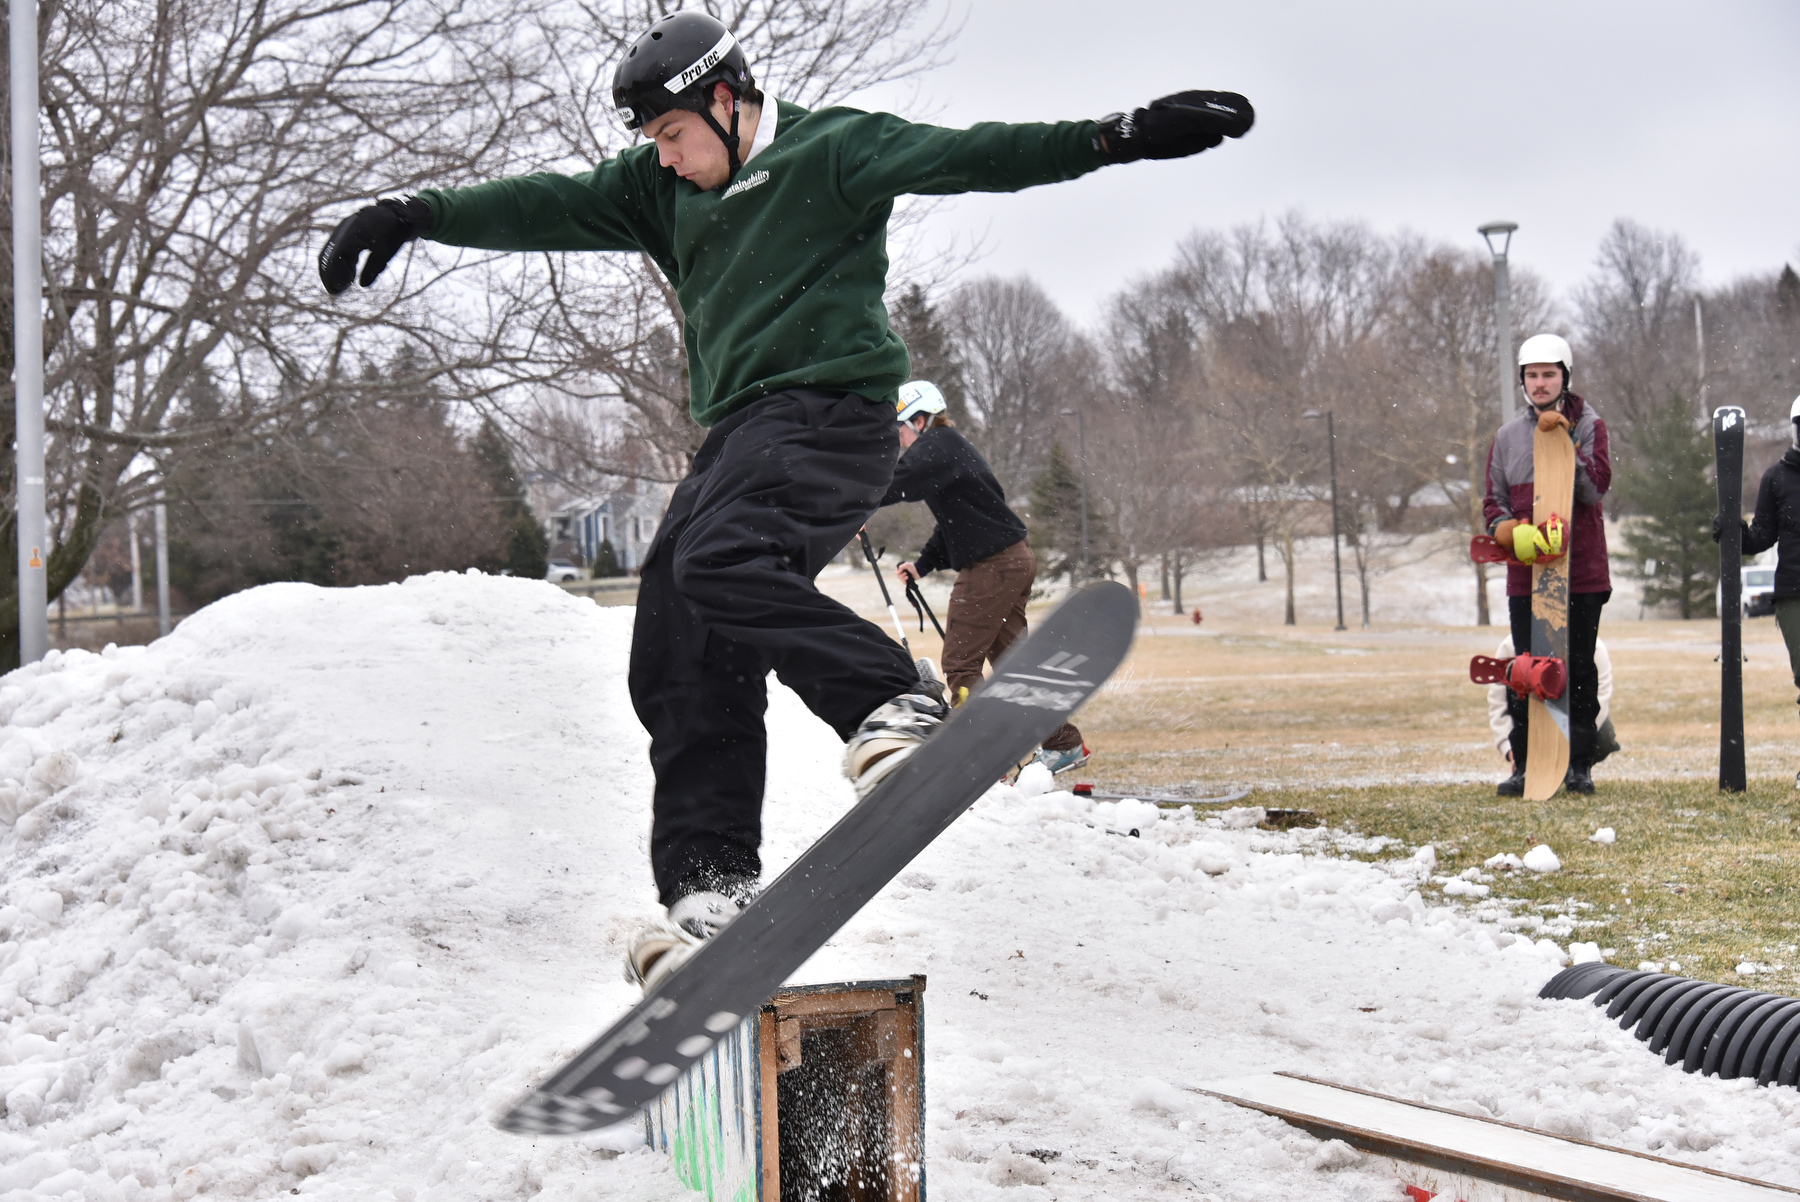 The Oswego Ski and Snowboard Club's annual Rail Jam on Feb. 17 was a free and open event for enthusiasts of all skill levels. Pictured is Jack Donahue, a technology education major, using a snowboard on some jumps.